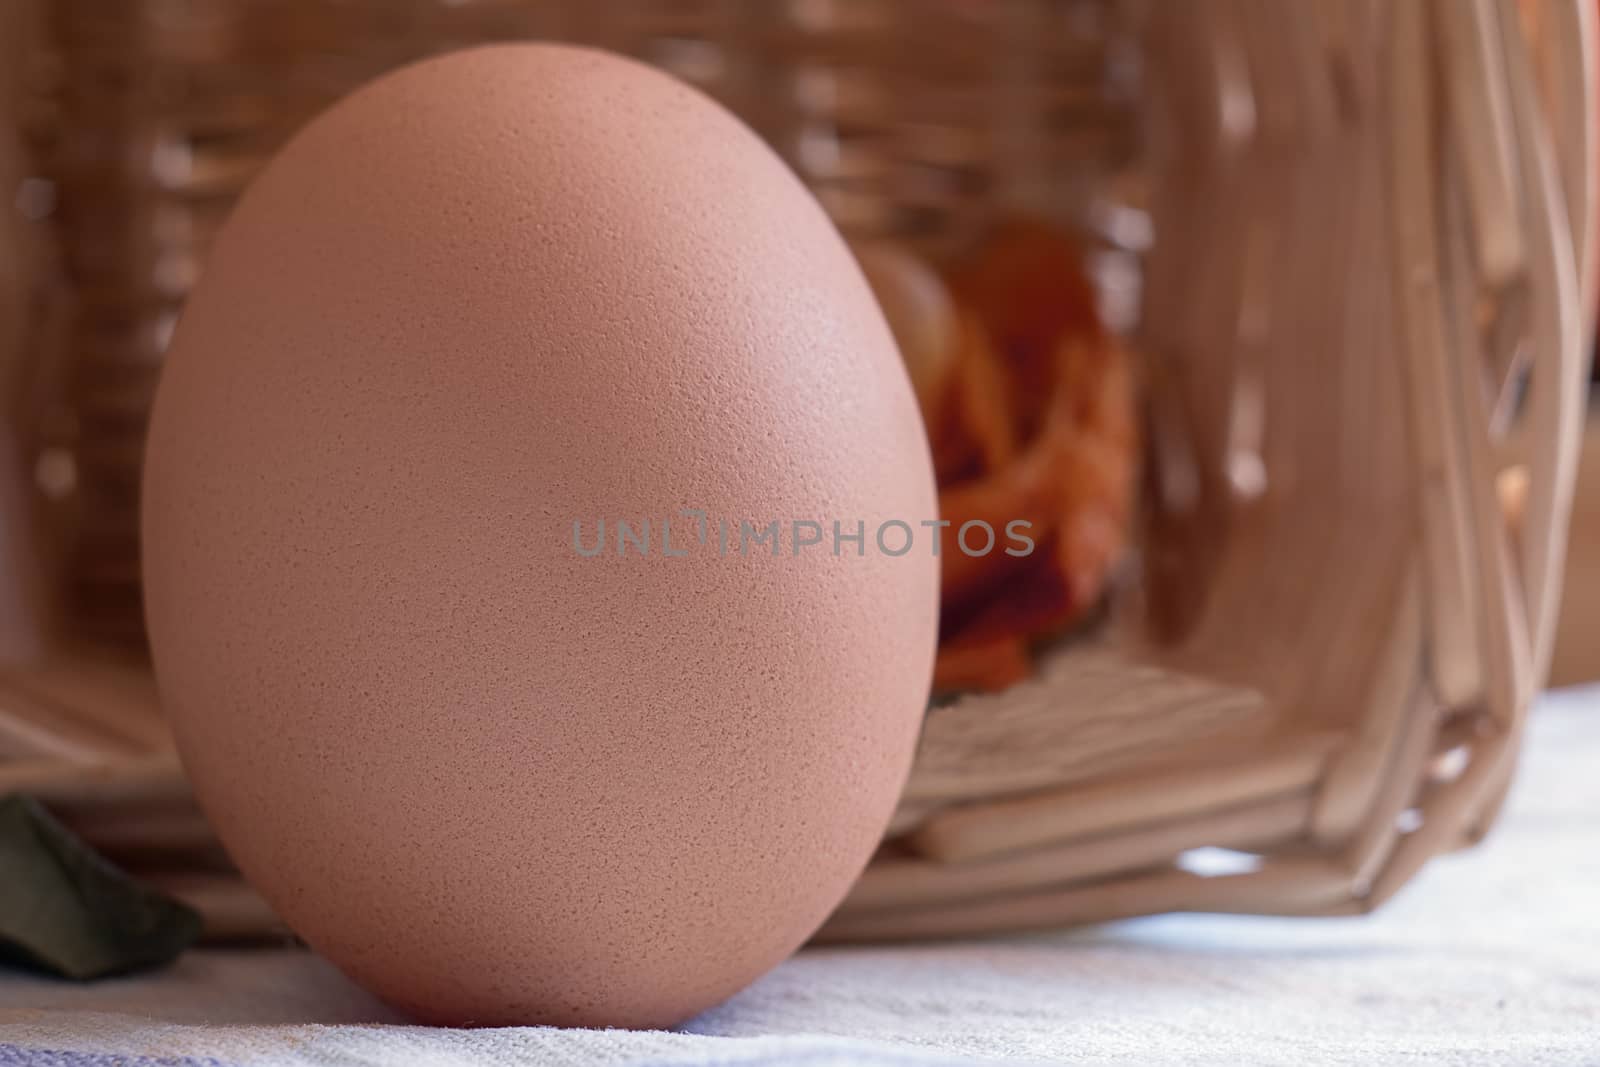 first floor of an egg with natural light